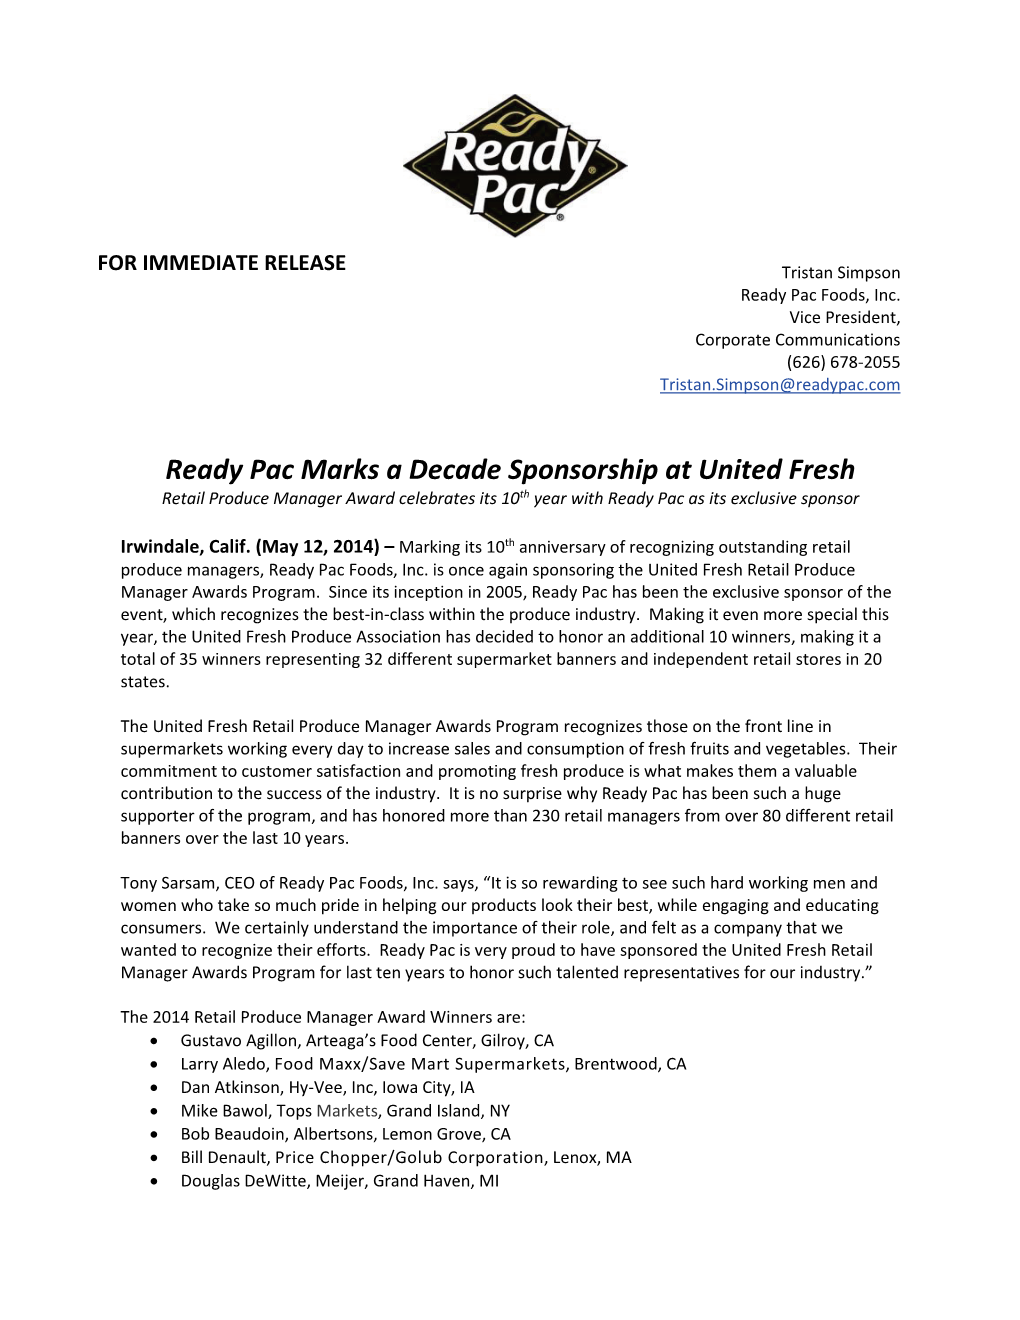 Ready Pac Marks a Decade Sponsorship at United Fresh Retail Produce Manager Award Celebrates Its 10Th Year with Ready Pac As Its Exclusive Sponsor